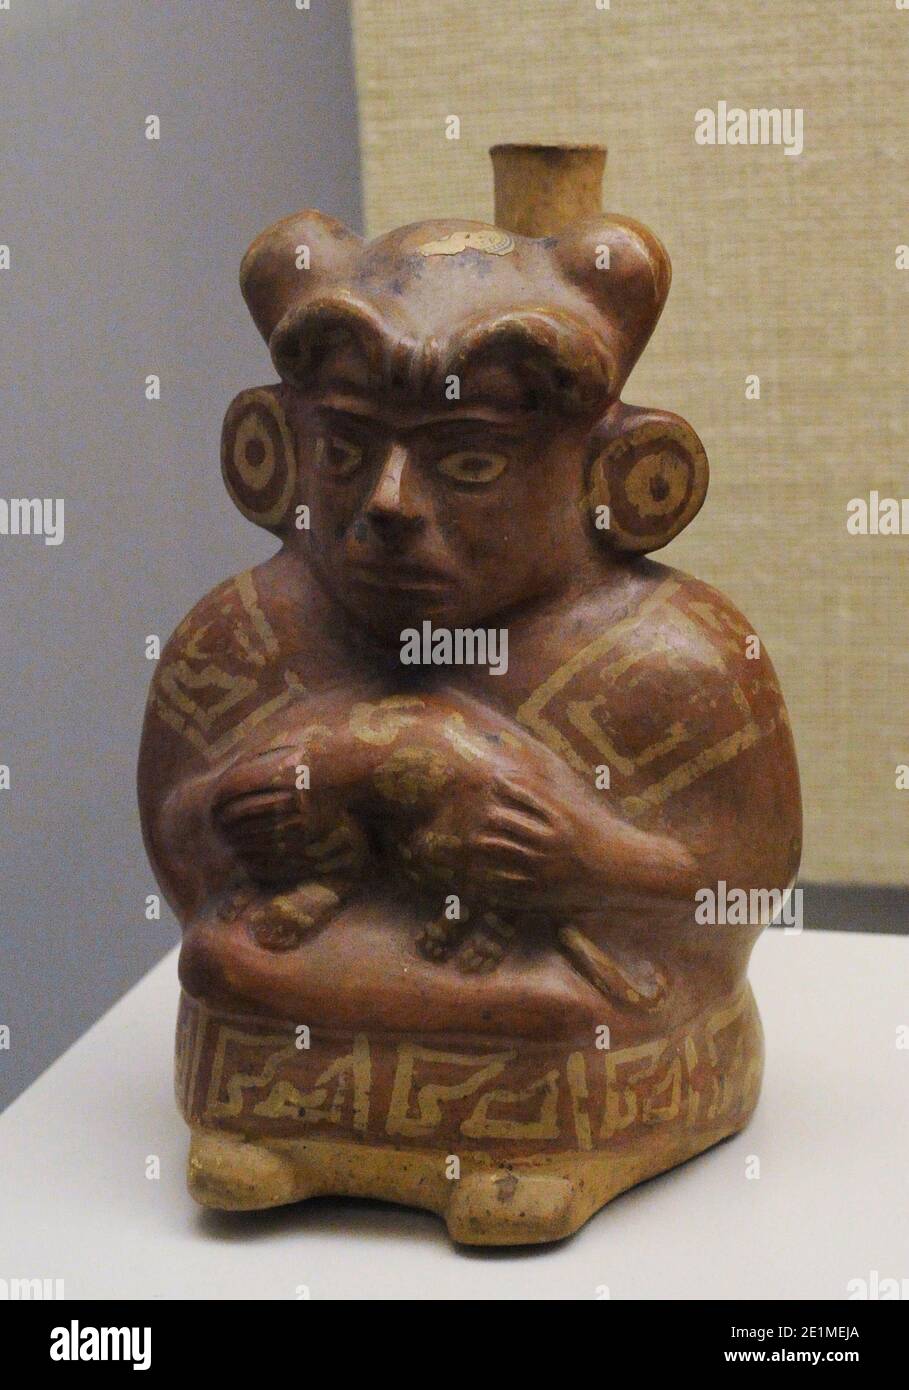 Vessel representing a person dressed in a shirt. Ceramics. Moche culture (100 BC-700 AD). Peru. Museum of the Americas. Madrid, Spain. Stock Photo